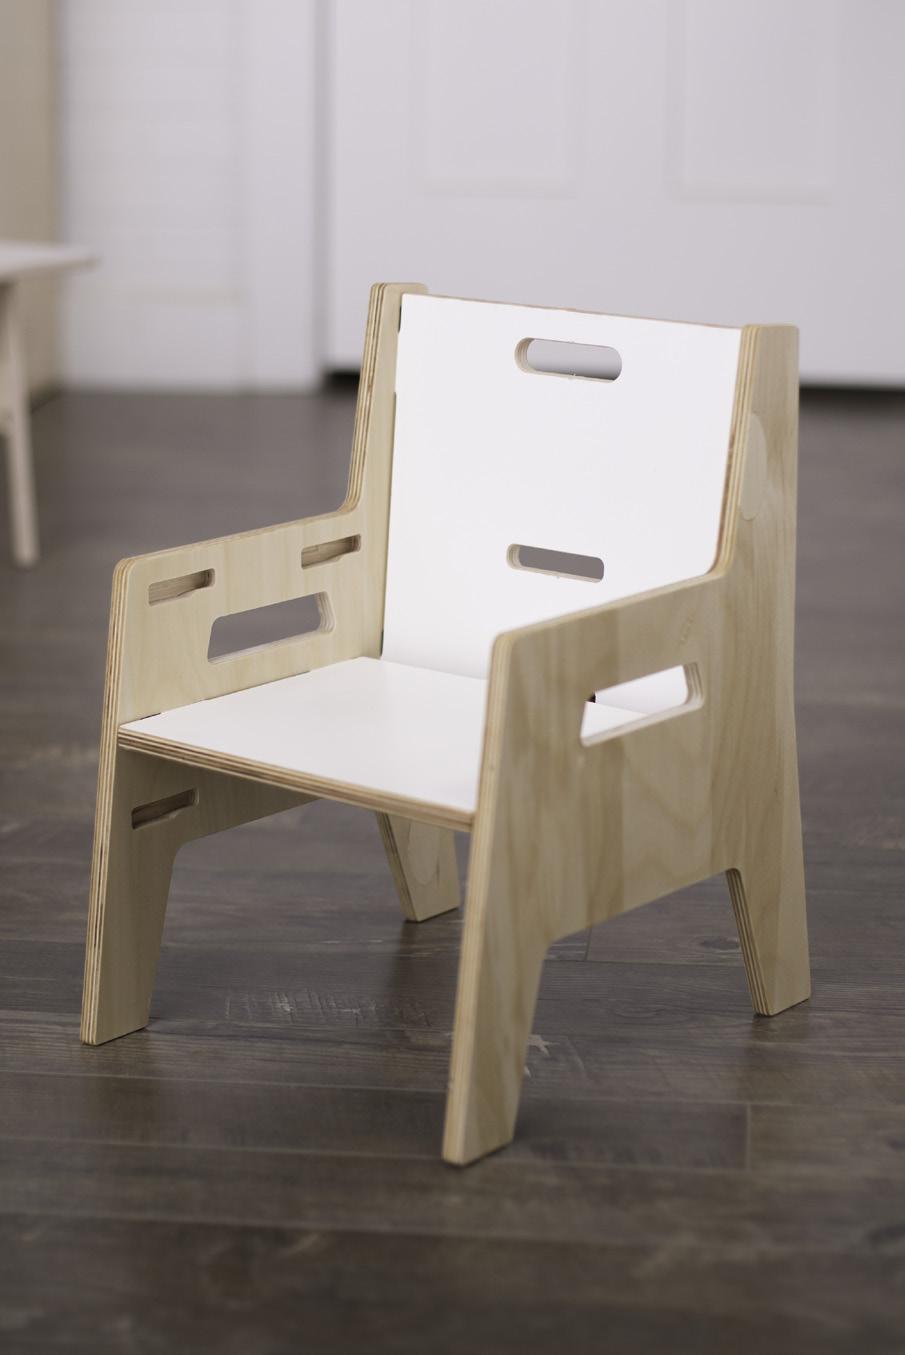 The Adjustable Weaning Chair can be adjusted to three heights to meet the changing needs of the child and last throughout infancy and early-childhood.